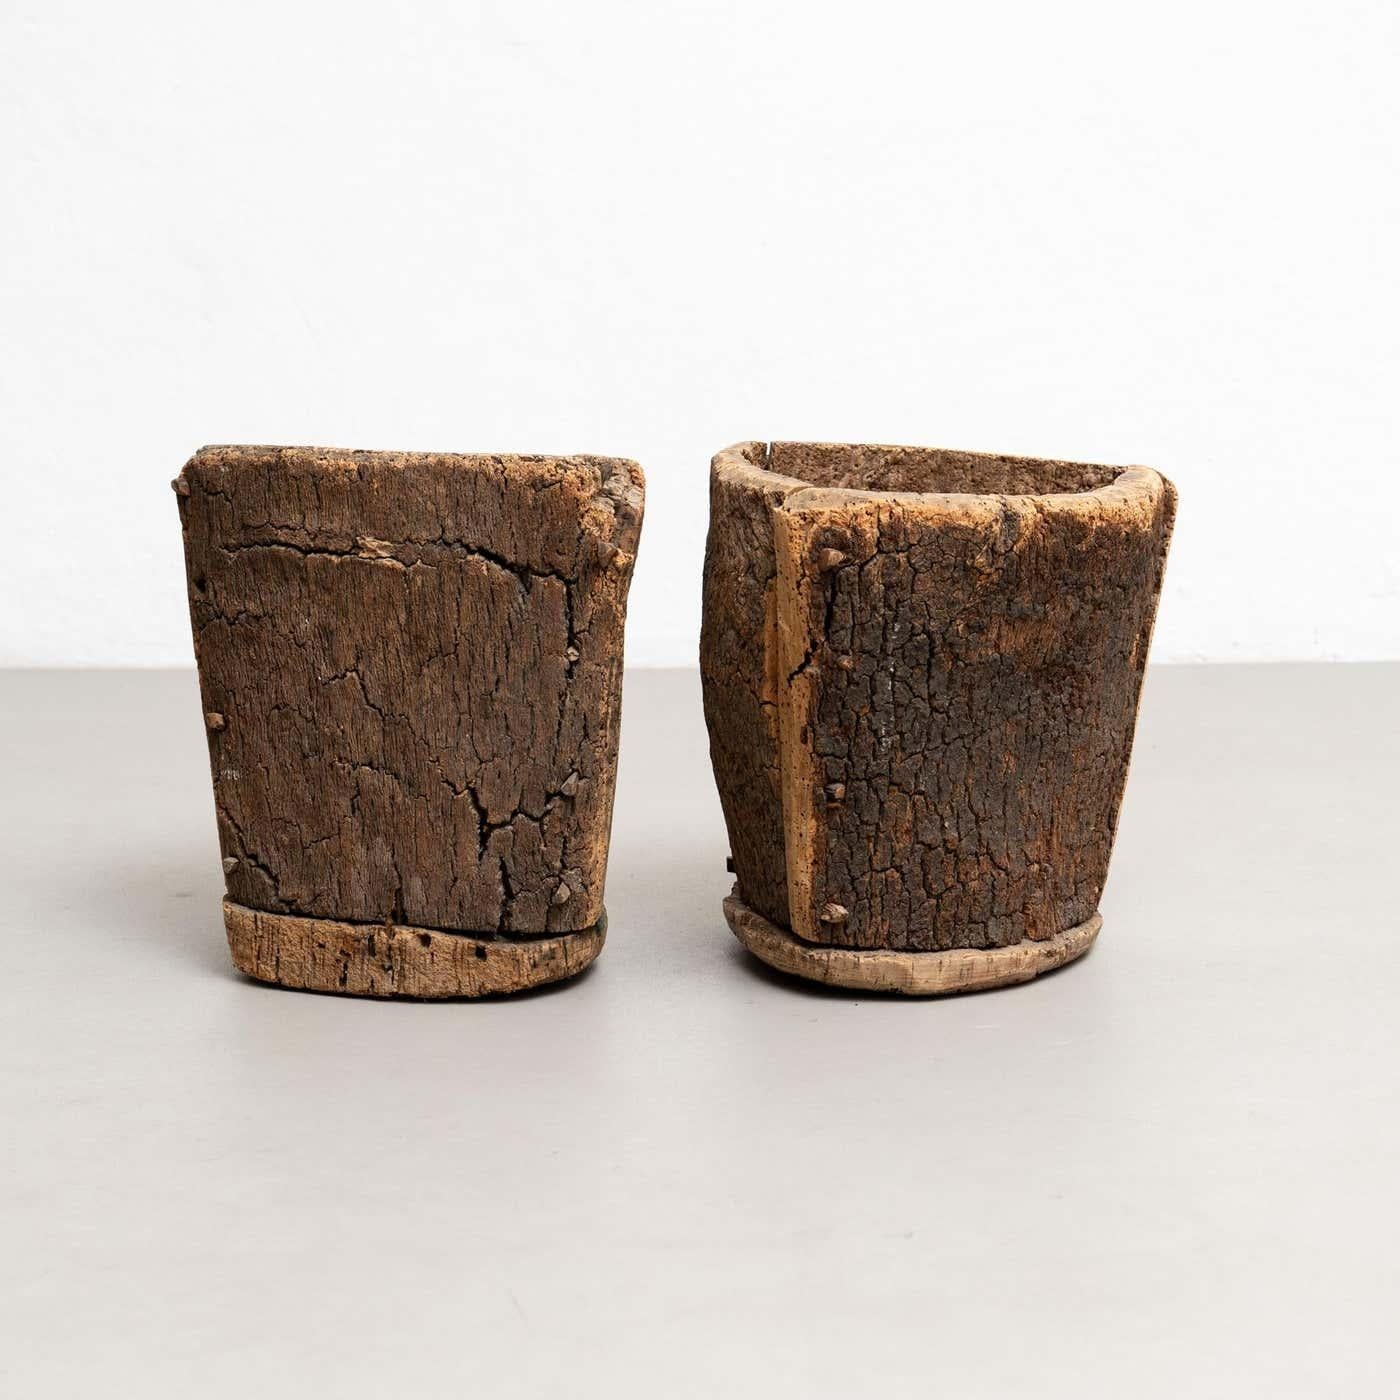 Embark on a journey through time with this enchanting pair of trash bins, relics from the early 1940s. Crafted in the distinctive Brutalist style, their designs radiate simplicity and rustic allure.

The enduring charm of cork is palpable in their